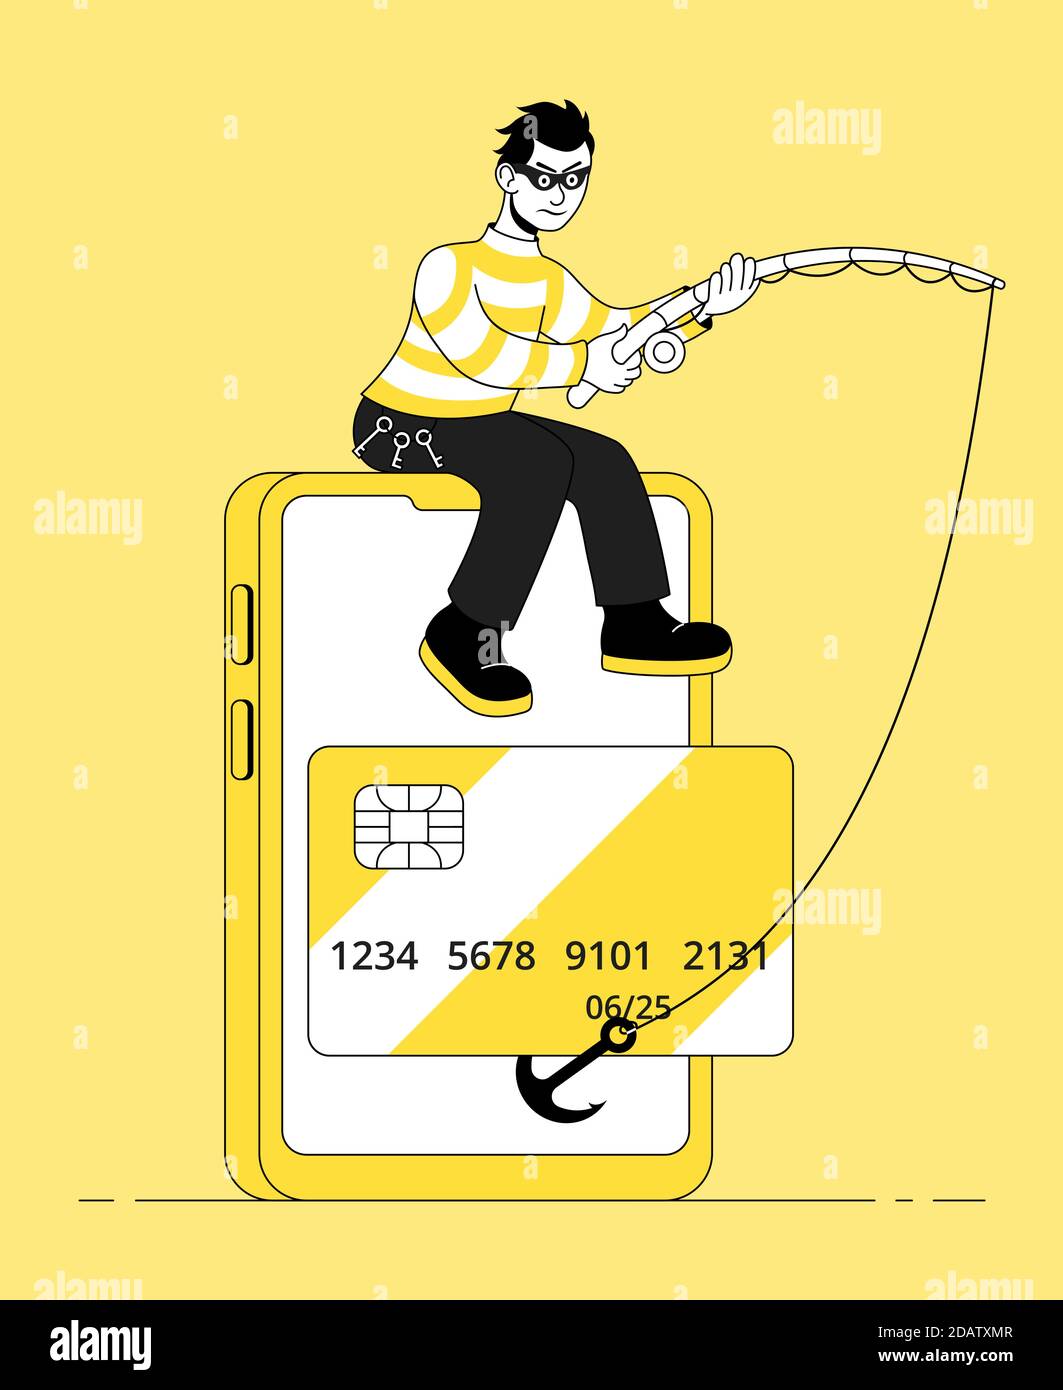 Masked robber with a fishing rode stealing credit card from a smartphone. Cartoon flat vector illustration. Stock Vector